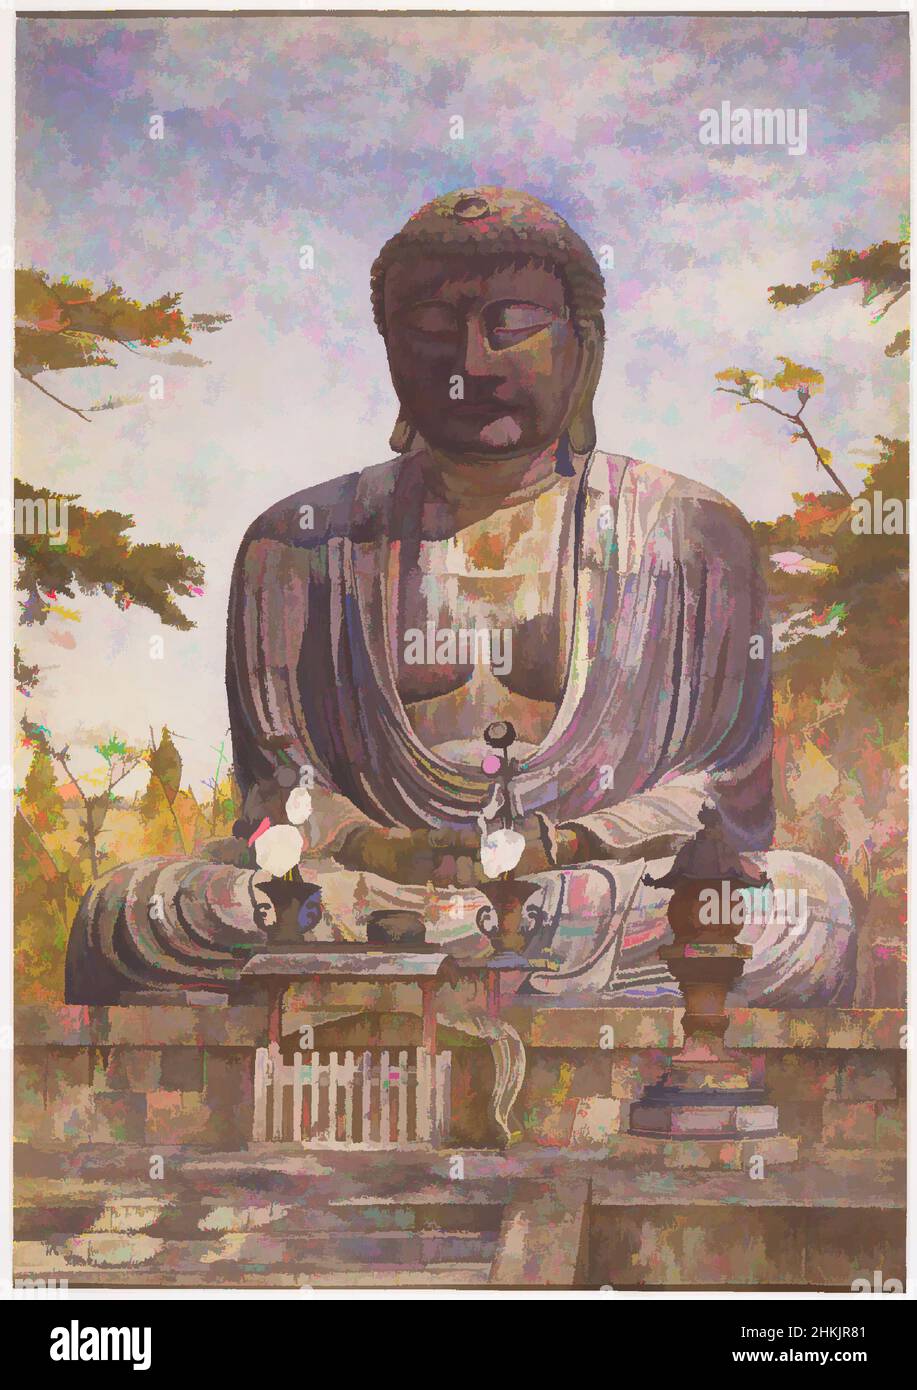 Art inspired by Daibutsu, Great Bronze Statue of Buddha at Kamakura, Japan, Henry Roderick Newman, American, 1843-1917, Watercolor and graphite on paper, 1898, 20 x 14 in., 50.8 x 35.6 cm, 19th Century, buddah, buddha, clouds, Japan, painting, painting of statue, seated, sky, somber, Classic works modernized by Artotop with a splash of modernity. Shapes, color and value, eye-catching visual impact on art. Emotions through freedom of artworks in a contemporary way. A timeless message pursuing a wildly creative new direction. Artists turning to the digital medium and creating the Artotop NFT Stock Photo